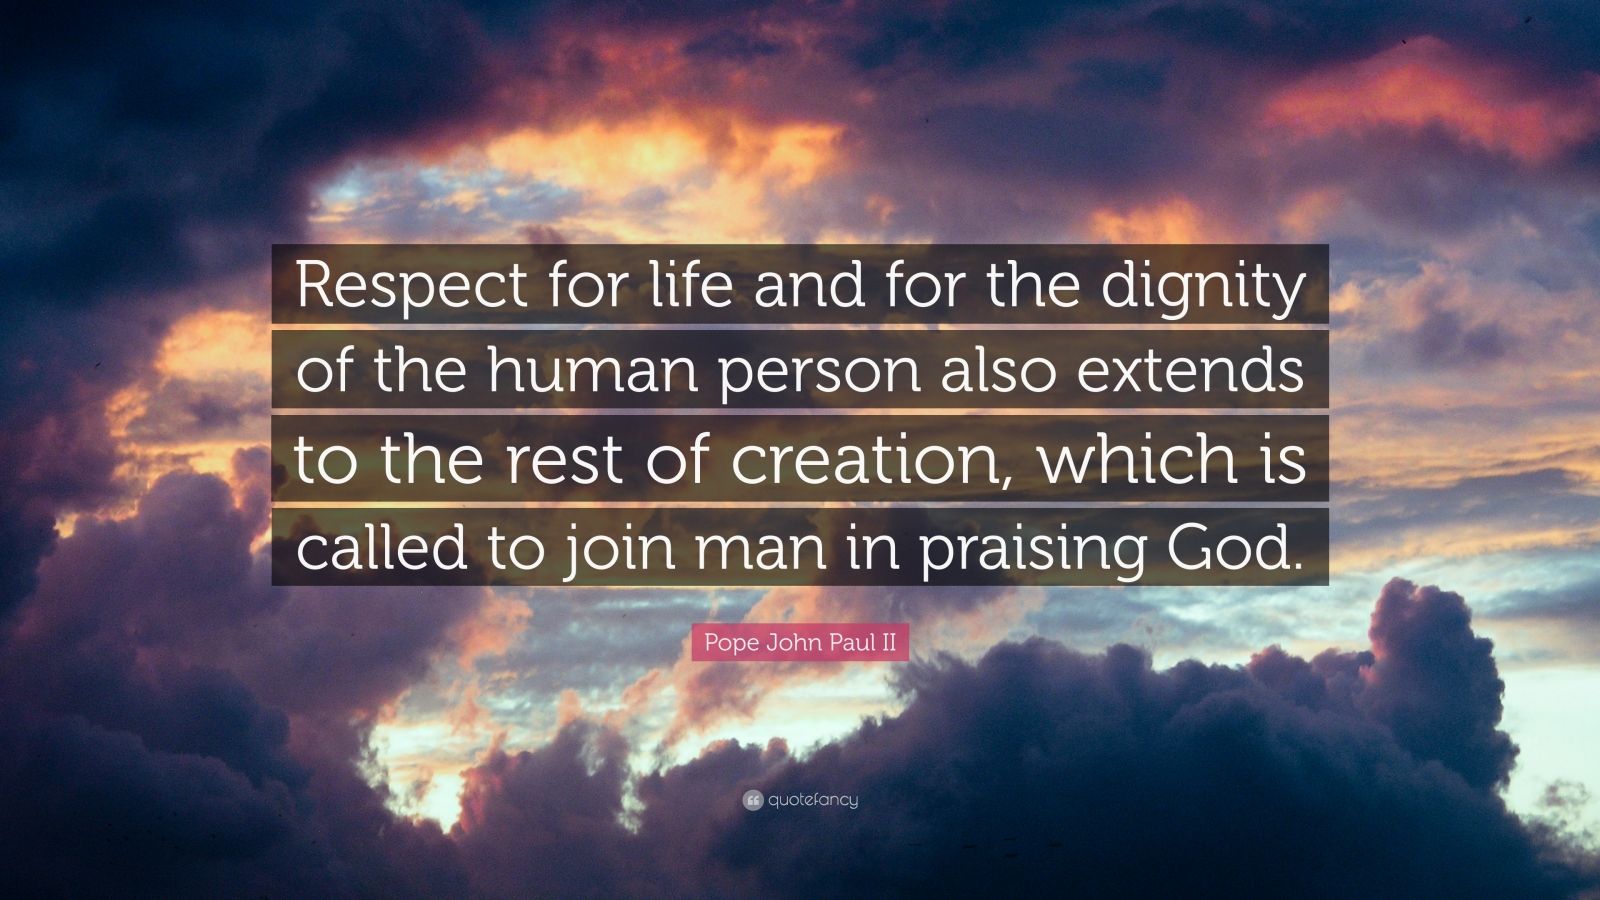 Pope John Paul II Quote: “Respect for life and for the dignity of the